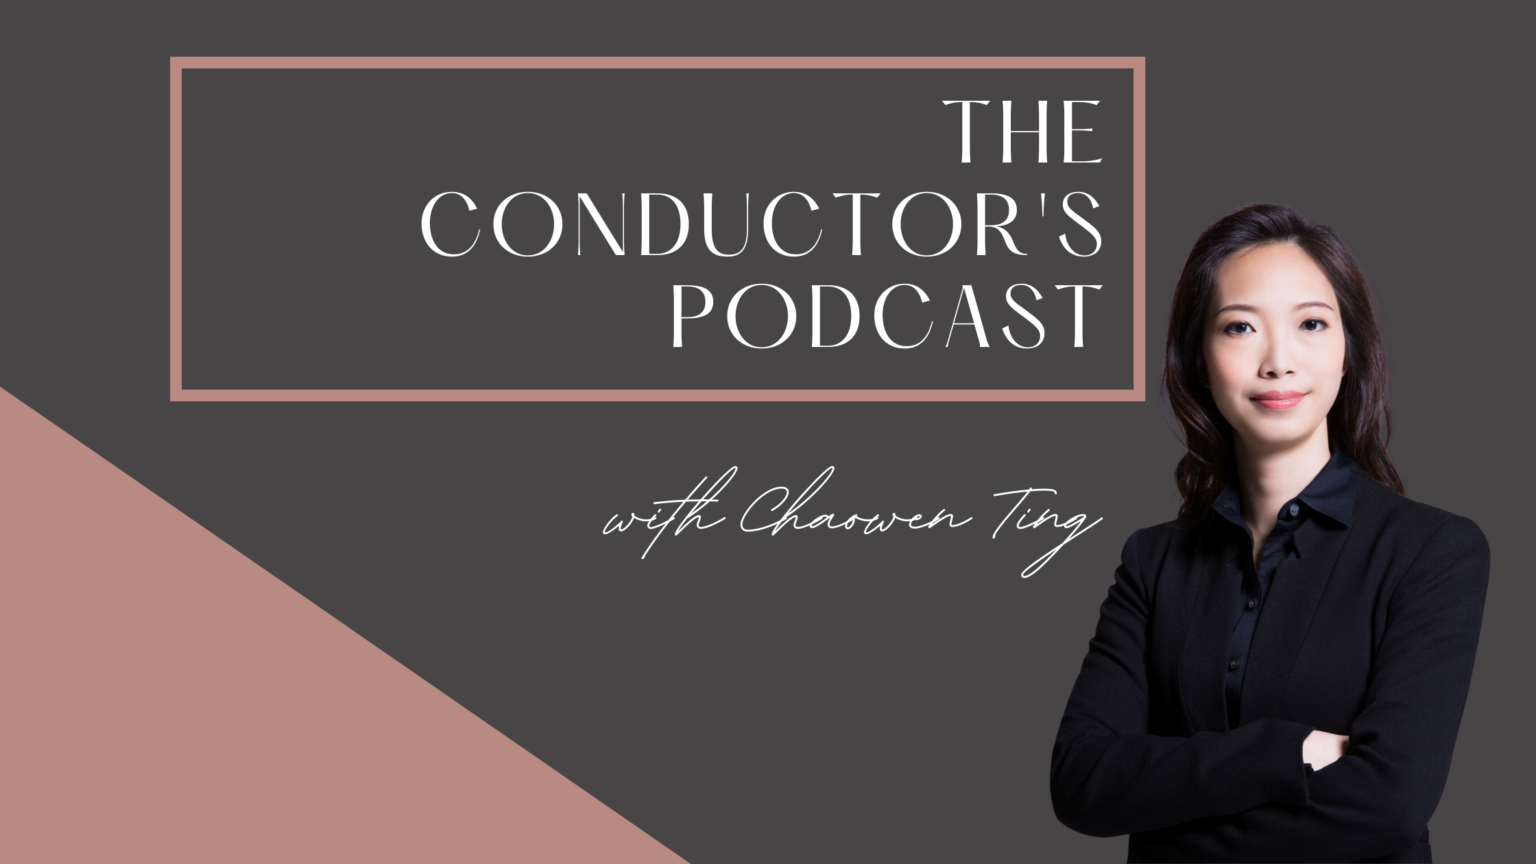 A banner for conductor Chaowen Ting's podcast, The Conductor's Podcast